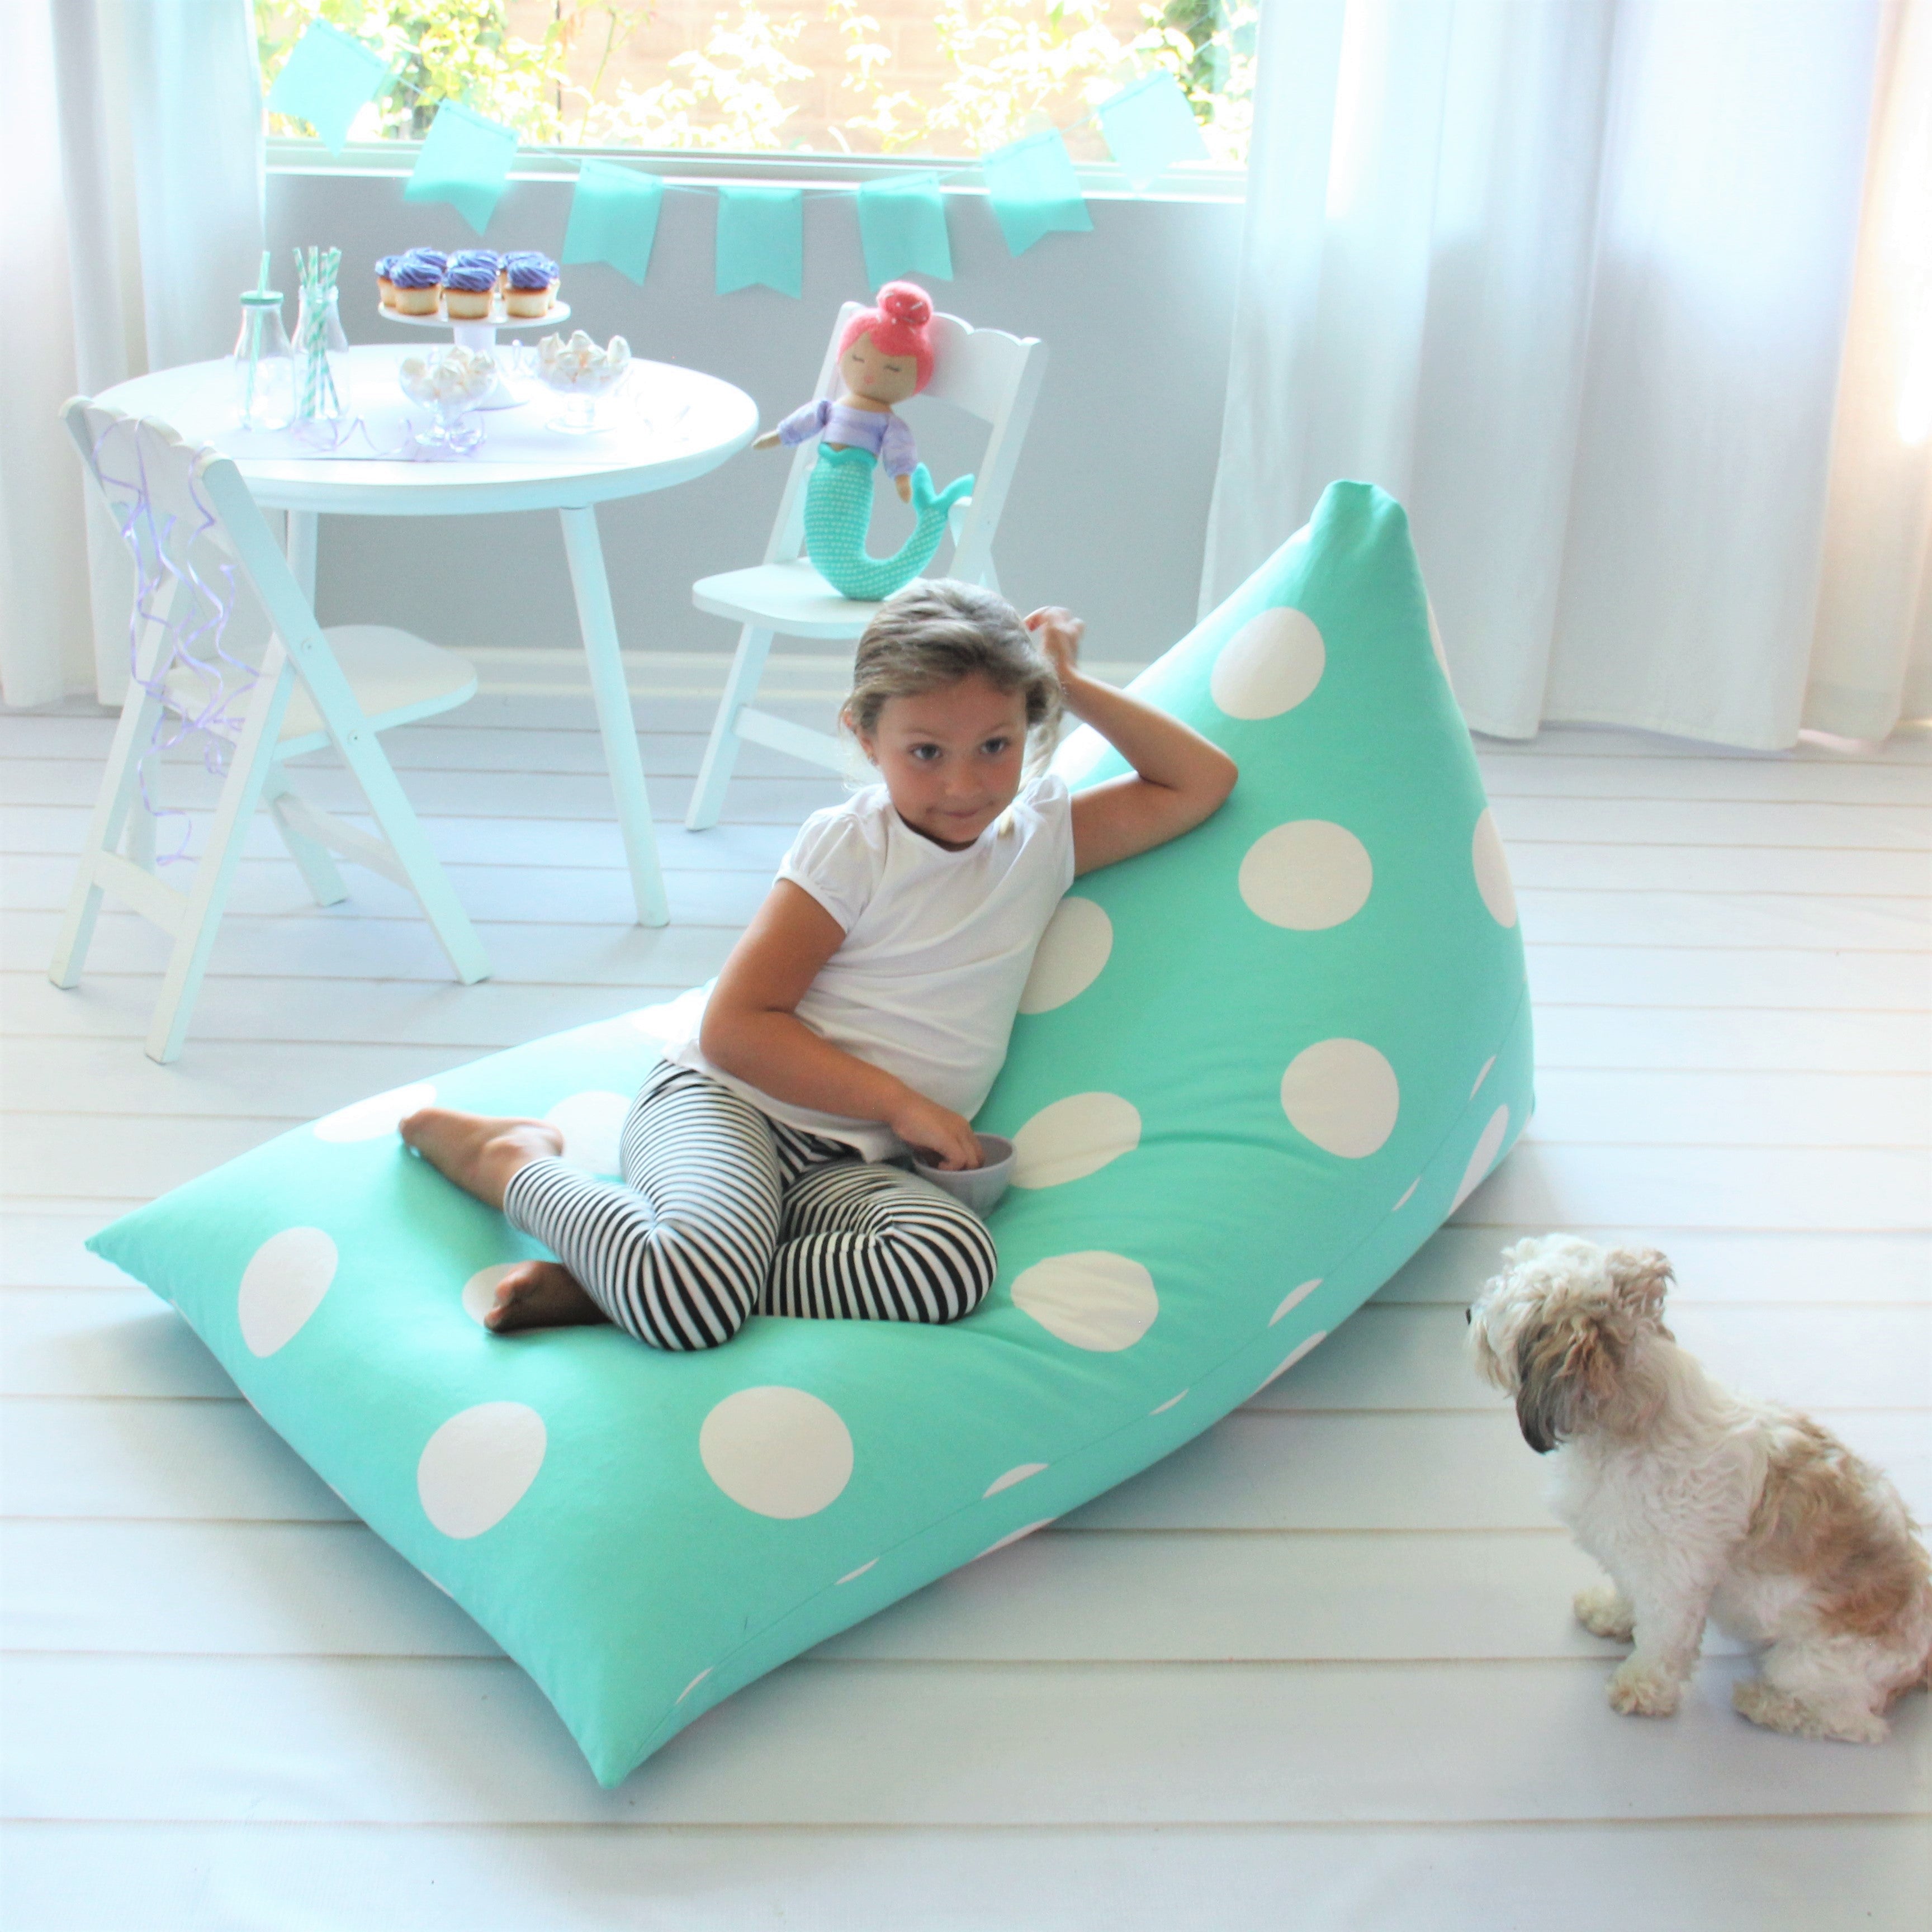 Lukery Bean Bag Chair for Adults (No Filler), 3D Butterfly Bean Bag Cover,  Stuffed Animal Storage Bean Bag Chairs for Kids, Comfy Bean Bags Beanbag